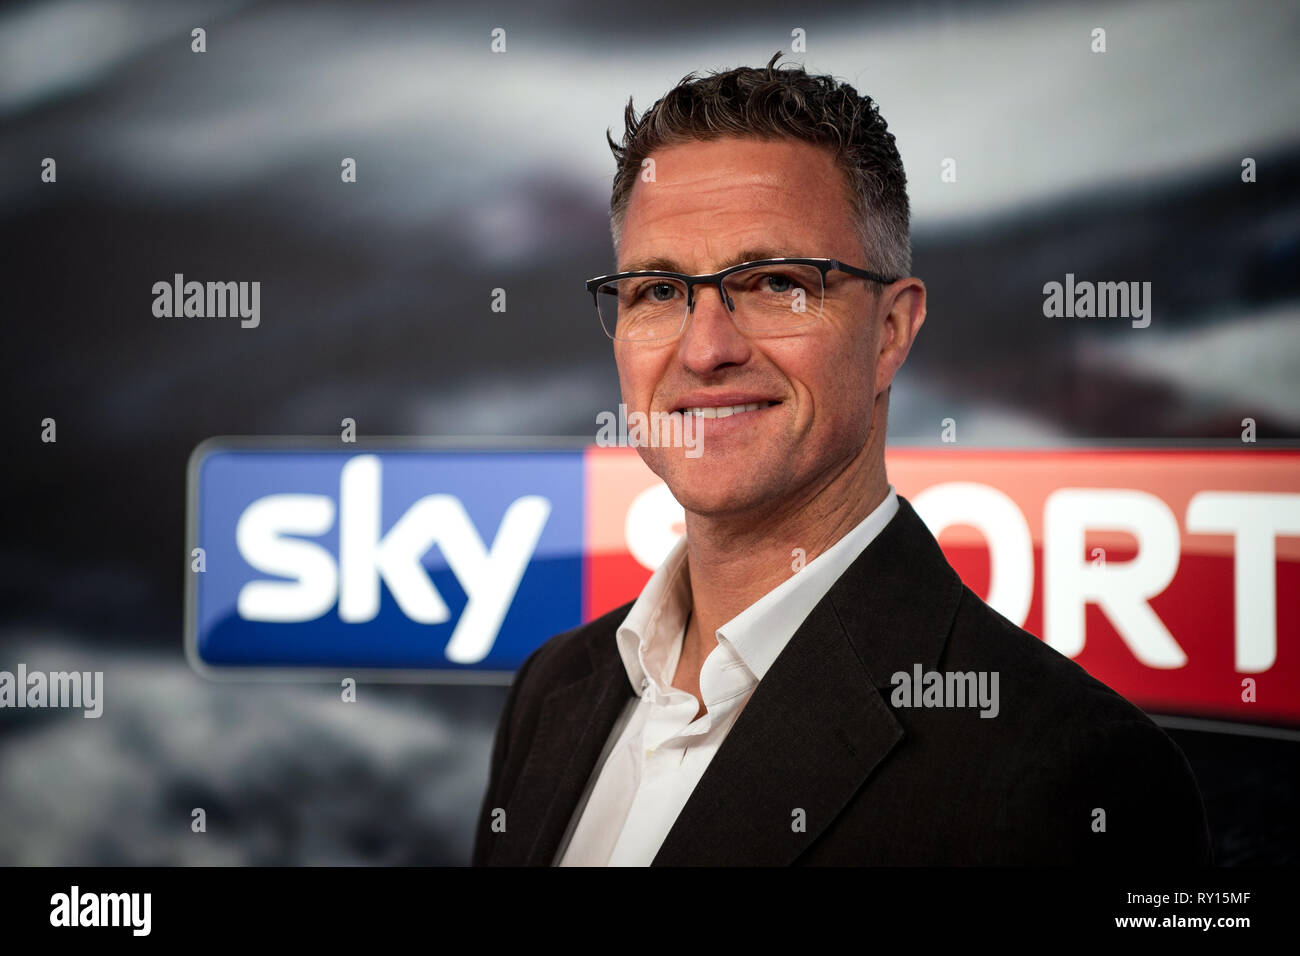 Unterföhring, Bavaria, Germany. 11 March 2019, Bavaria, Unterföhring: Ralf  Schumacher (r), former Formula 1 racing driver, and Sascha Roos, sports  commentator, talk at a press conference. In the new Formula 1 season,